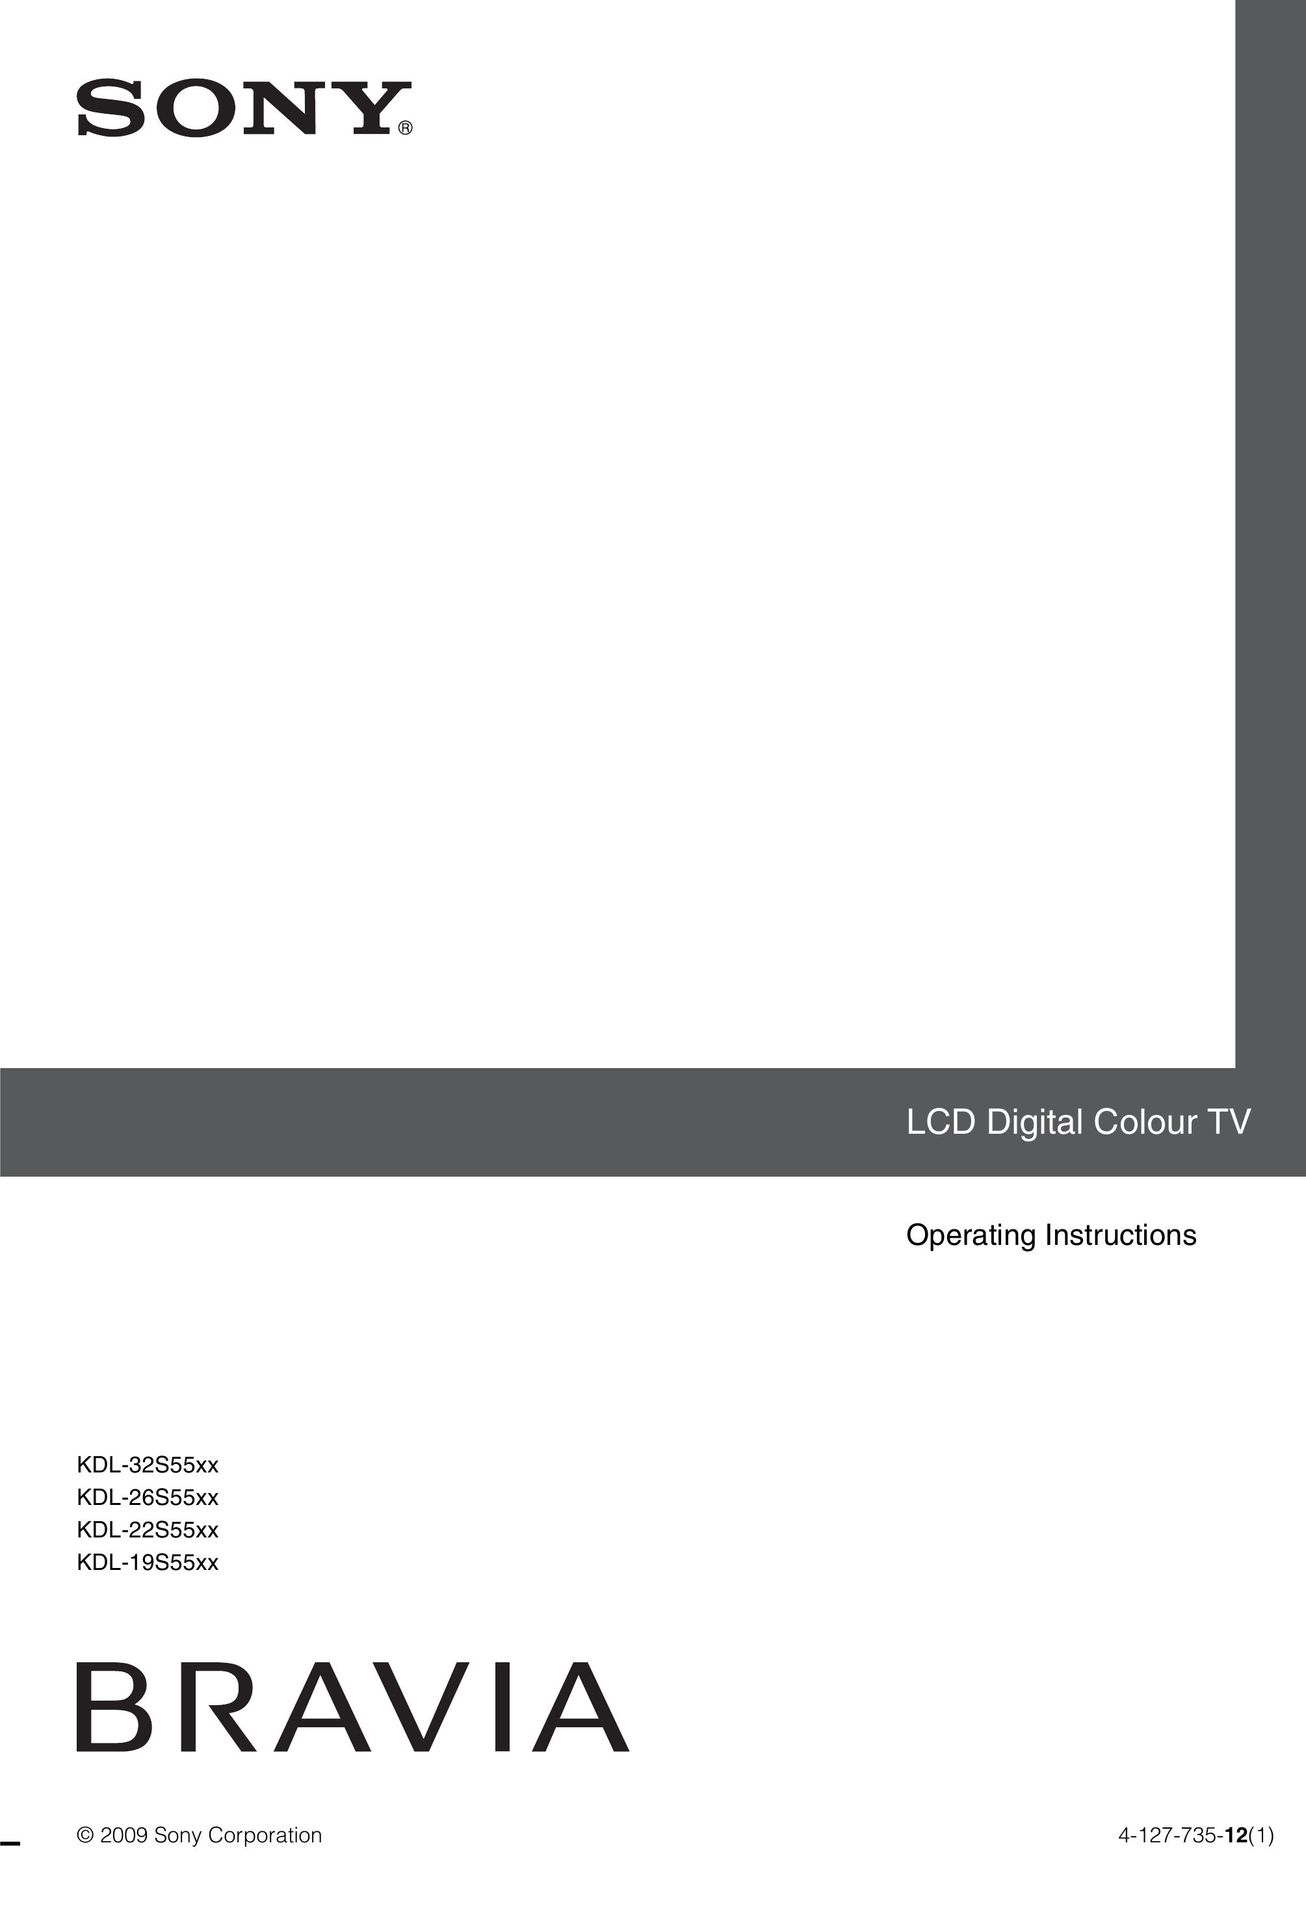 Sony 4-127-735-12(1) Flat Panel Television User Manual